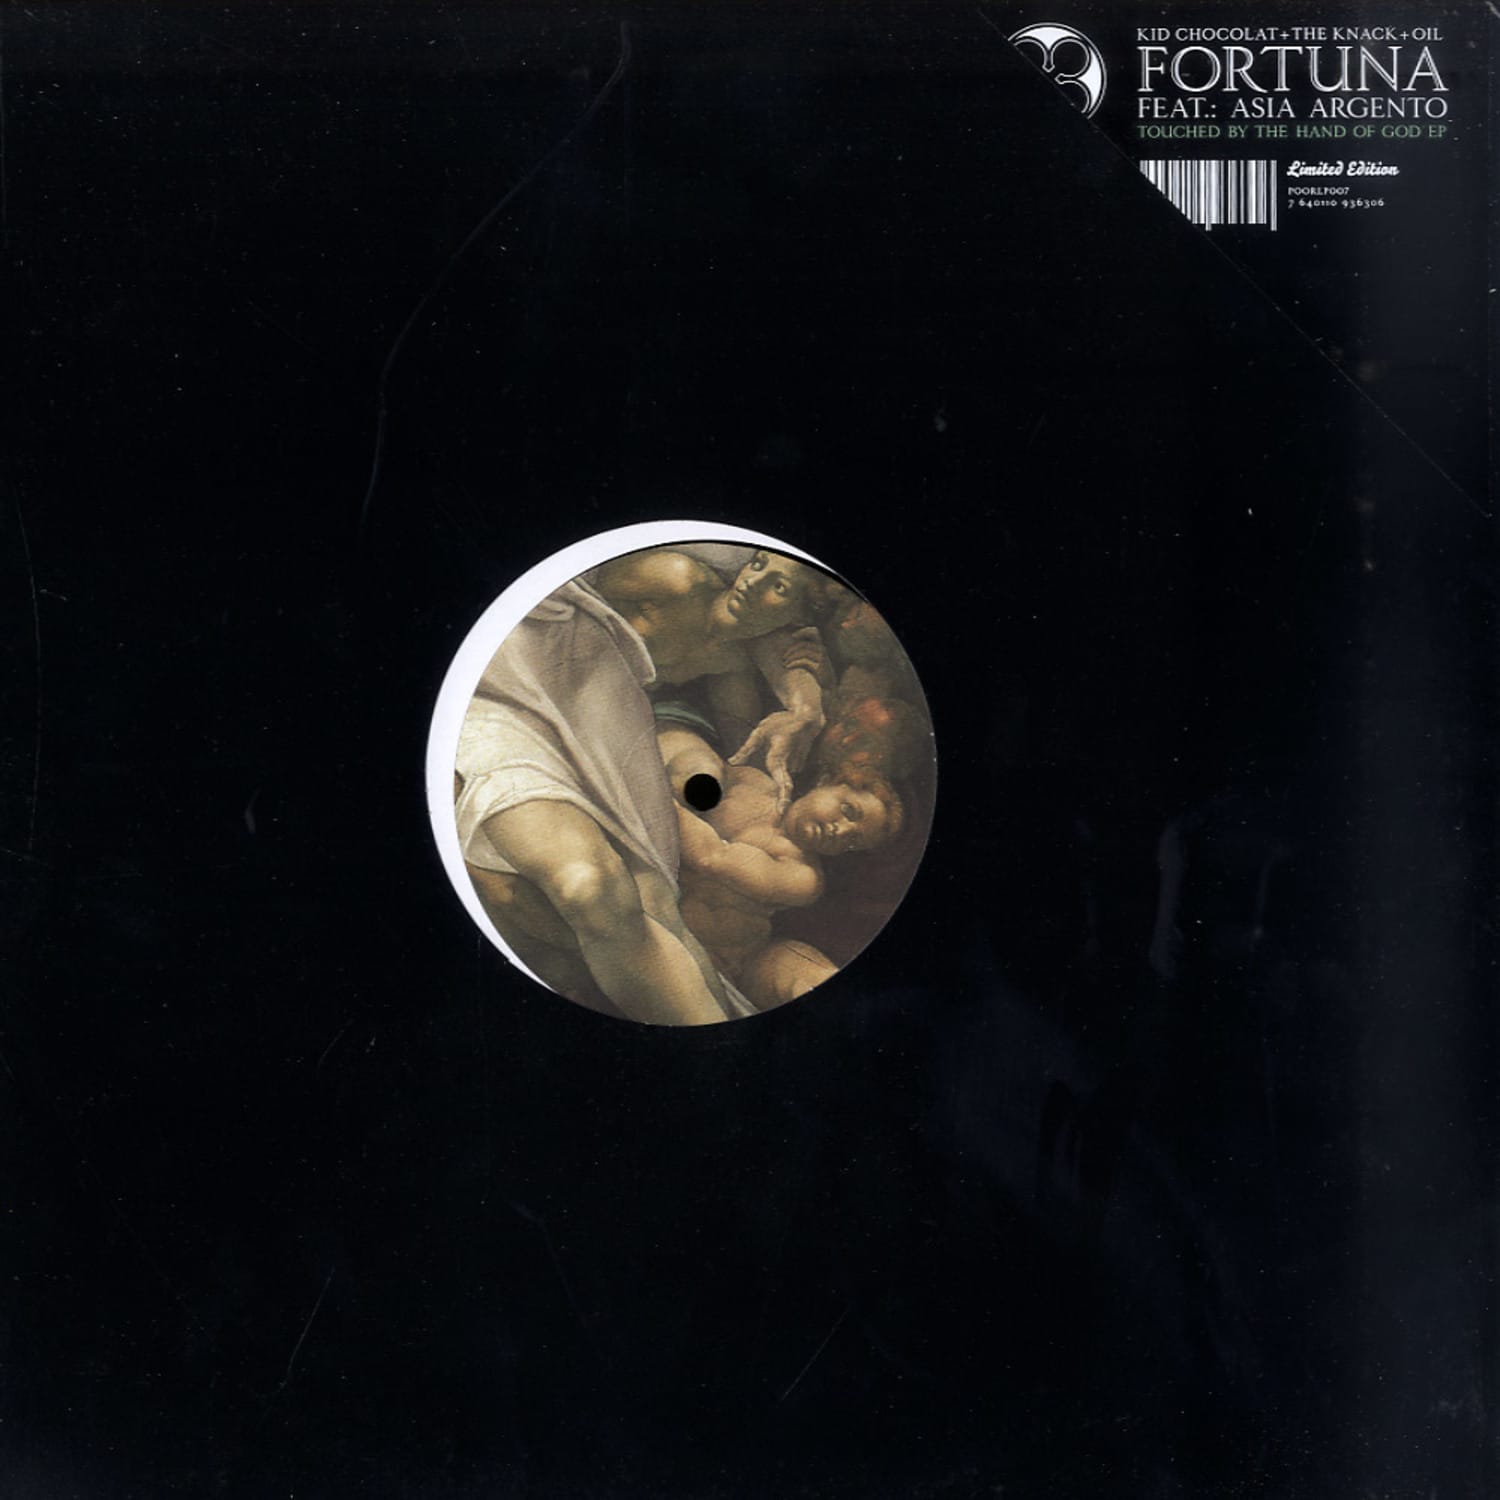 Fortuna feat. Asia Argento - TOUCHED BY THE HAND OF GOD EP / EMPEROR MACHINE RMX